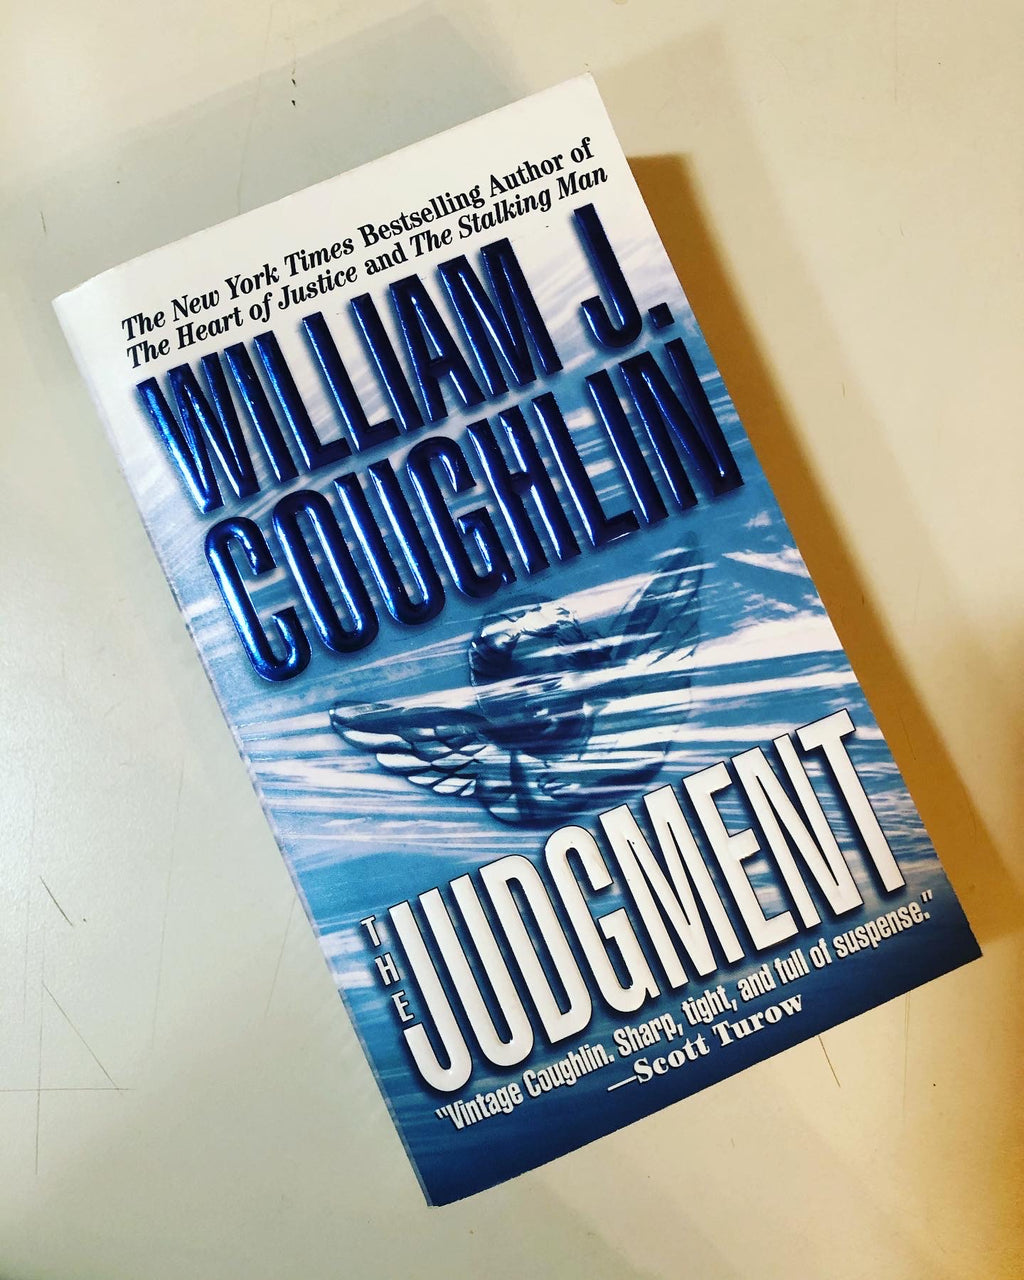 The Judgement- By William J. Coughlin